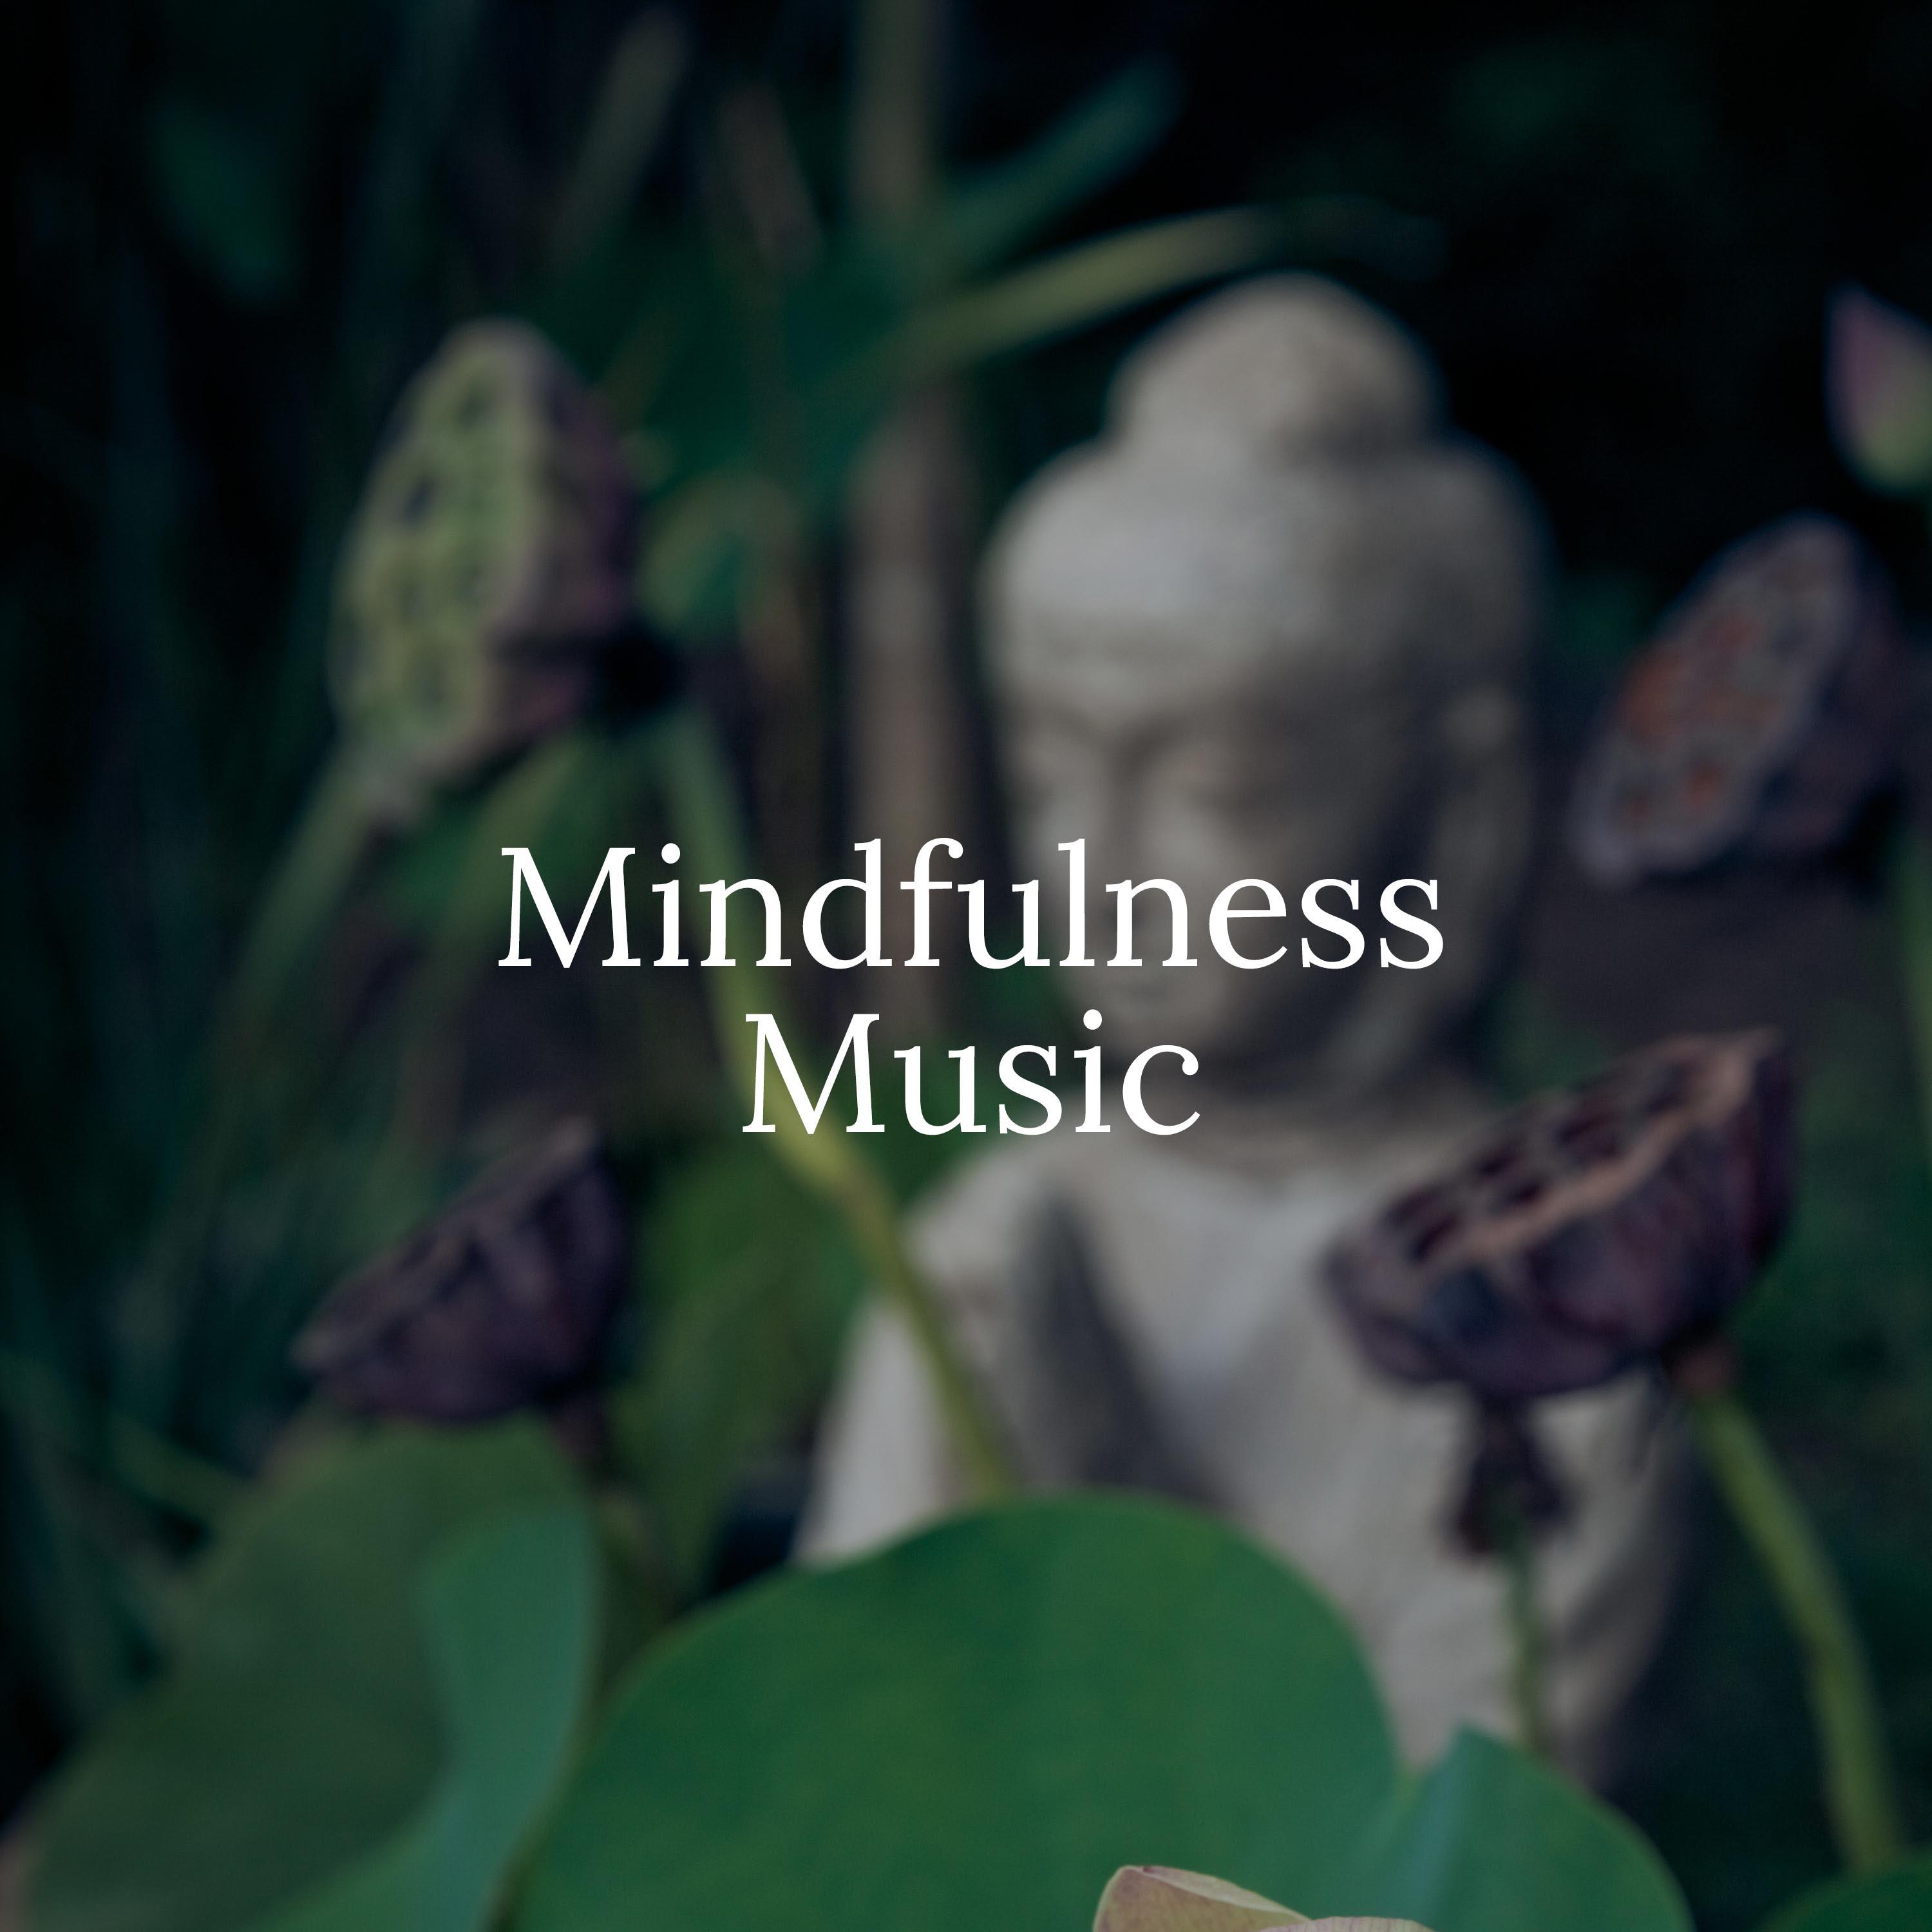 Oriental Melodies Music for Sleep, Relax Meditation